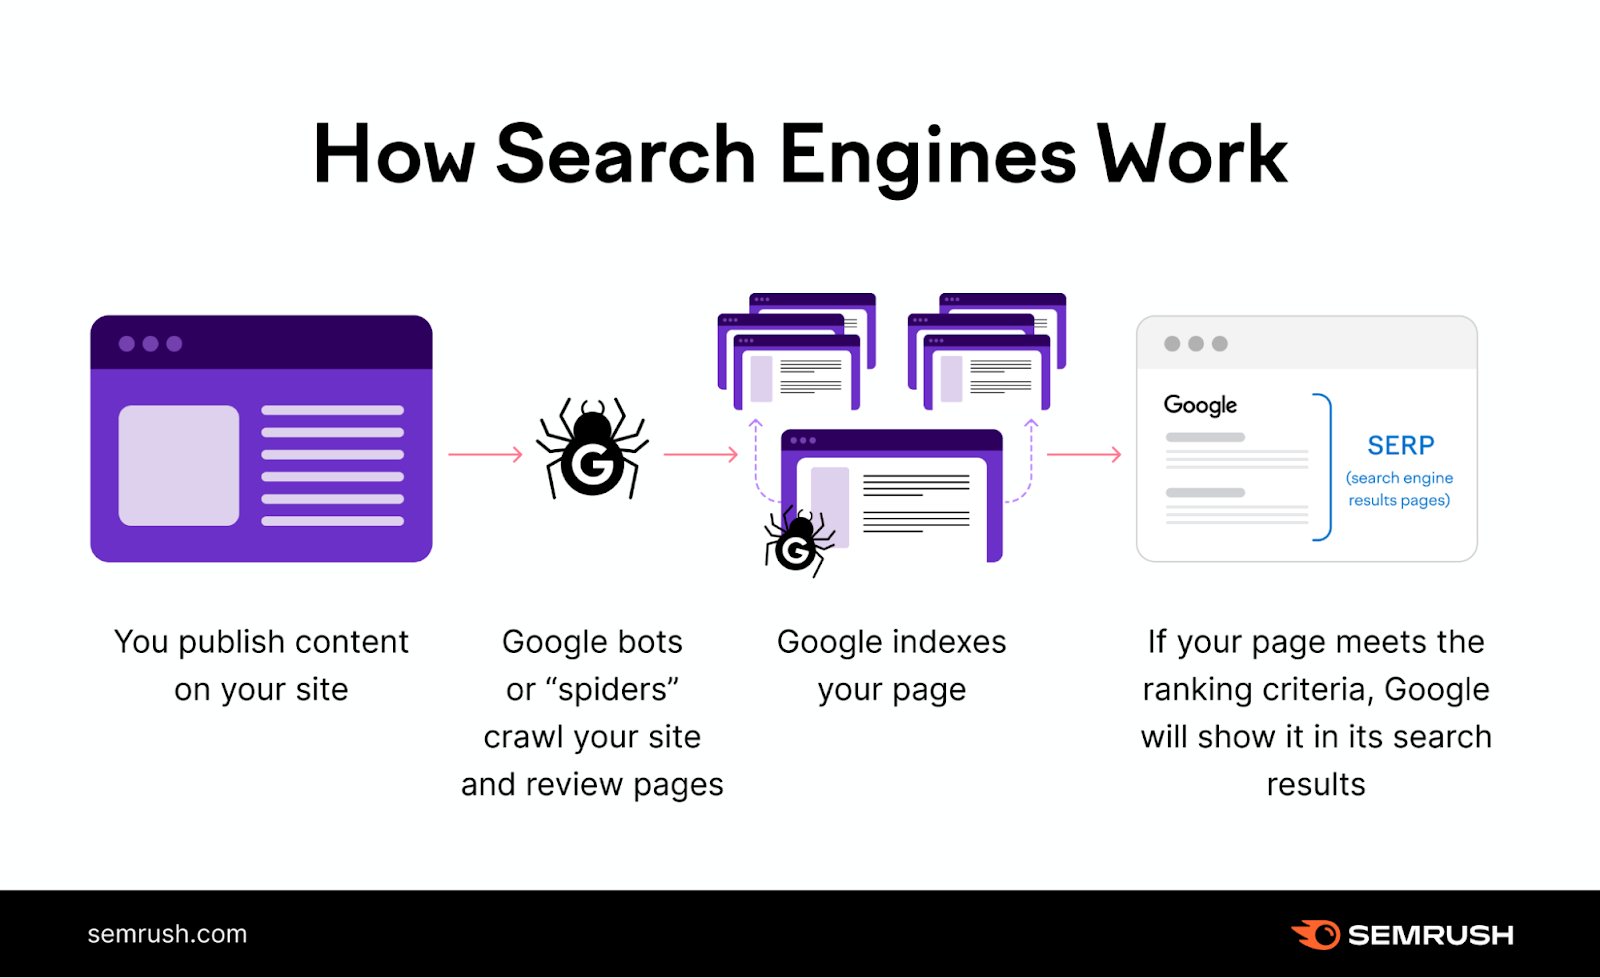 An infographic by Semrush showing how search engines work